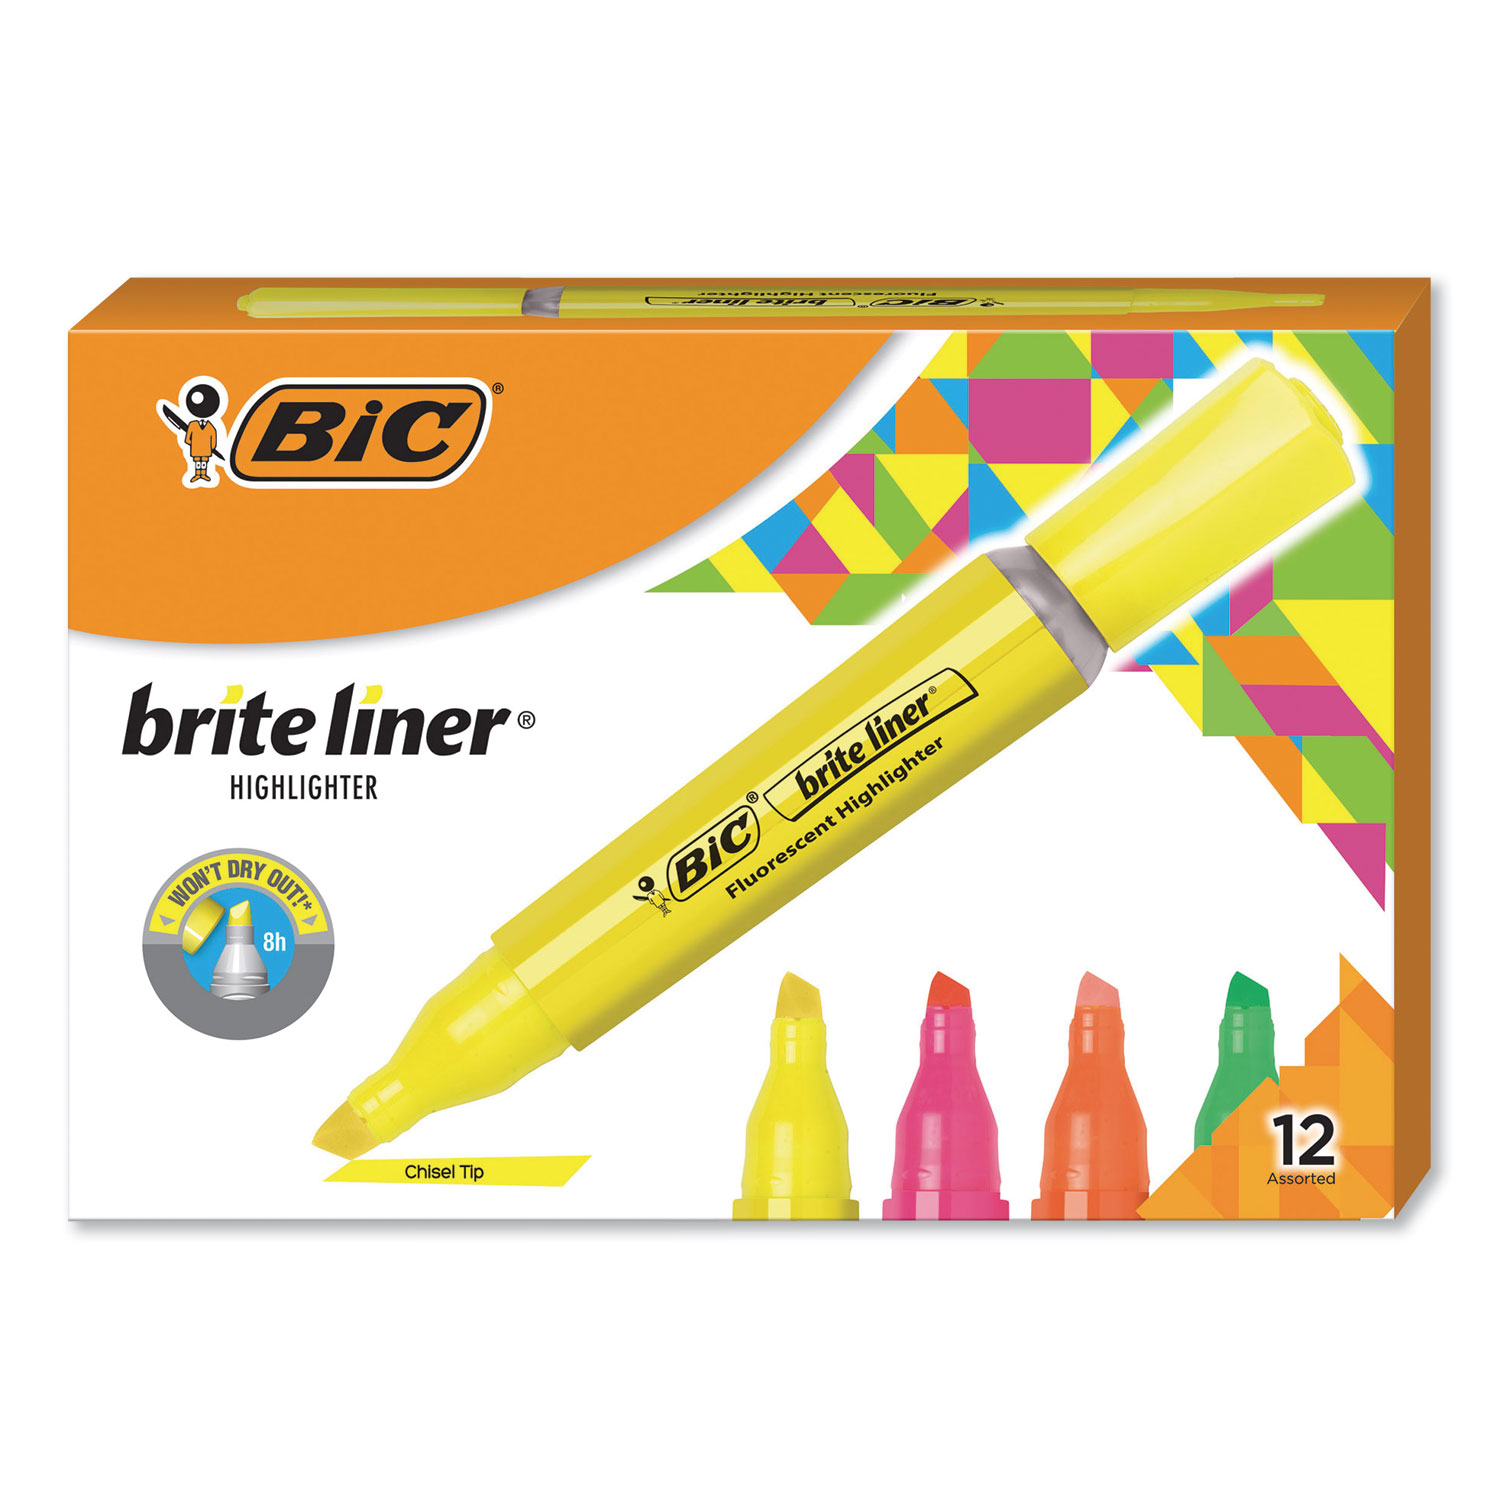  BIC BLMG11AST Brite Liner Tank-Style Highlighter, Chisel Tip, Assorted Colors, Dozen (BICBLMG11AST) 